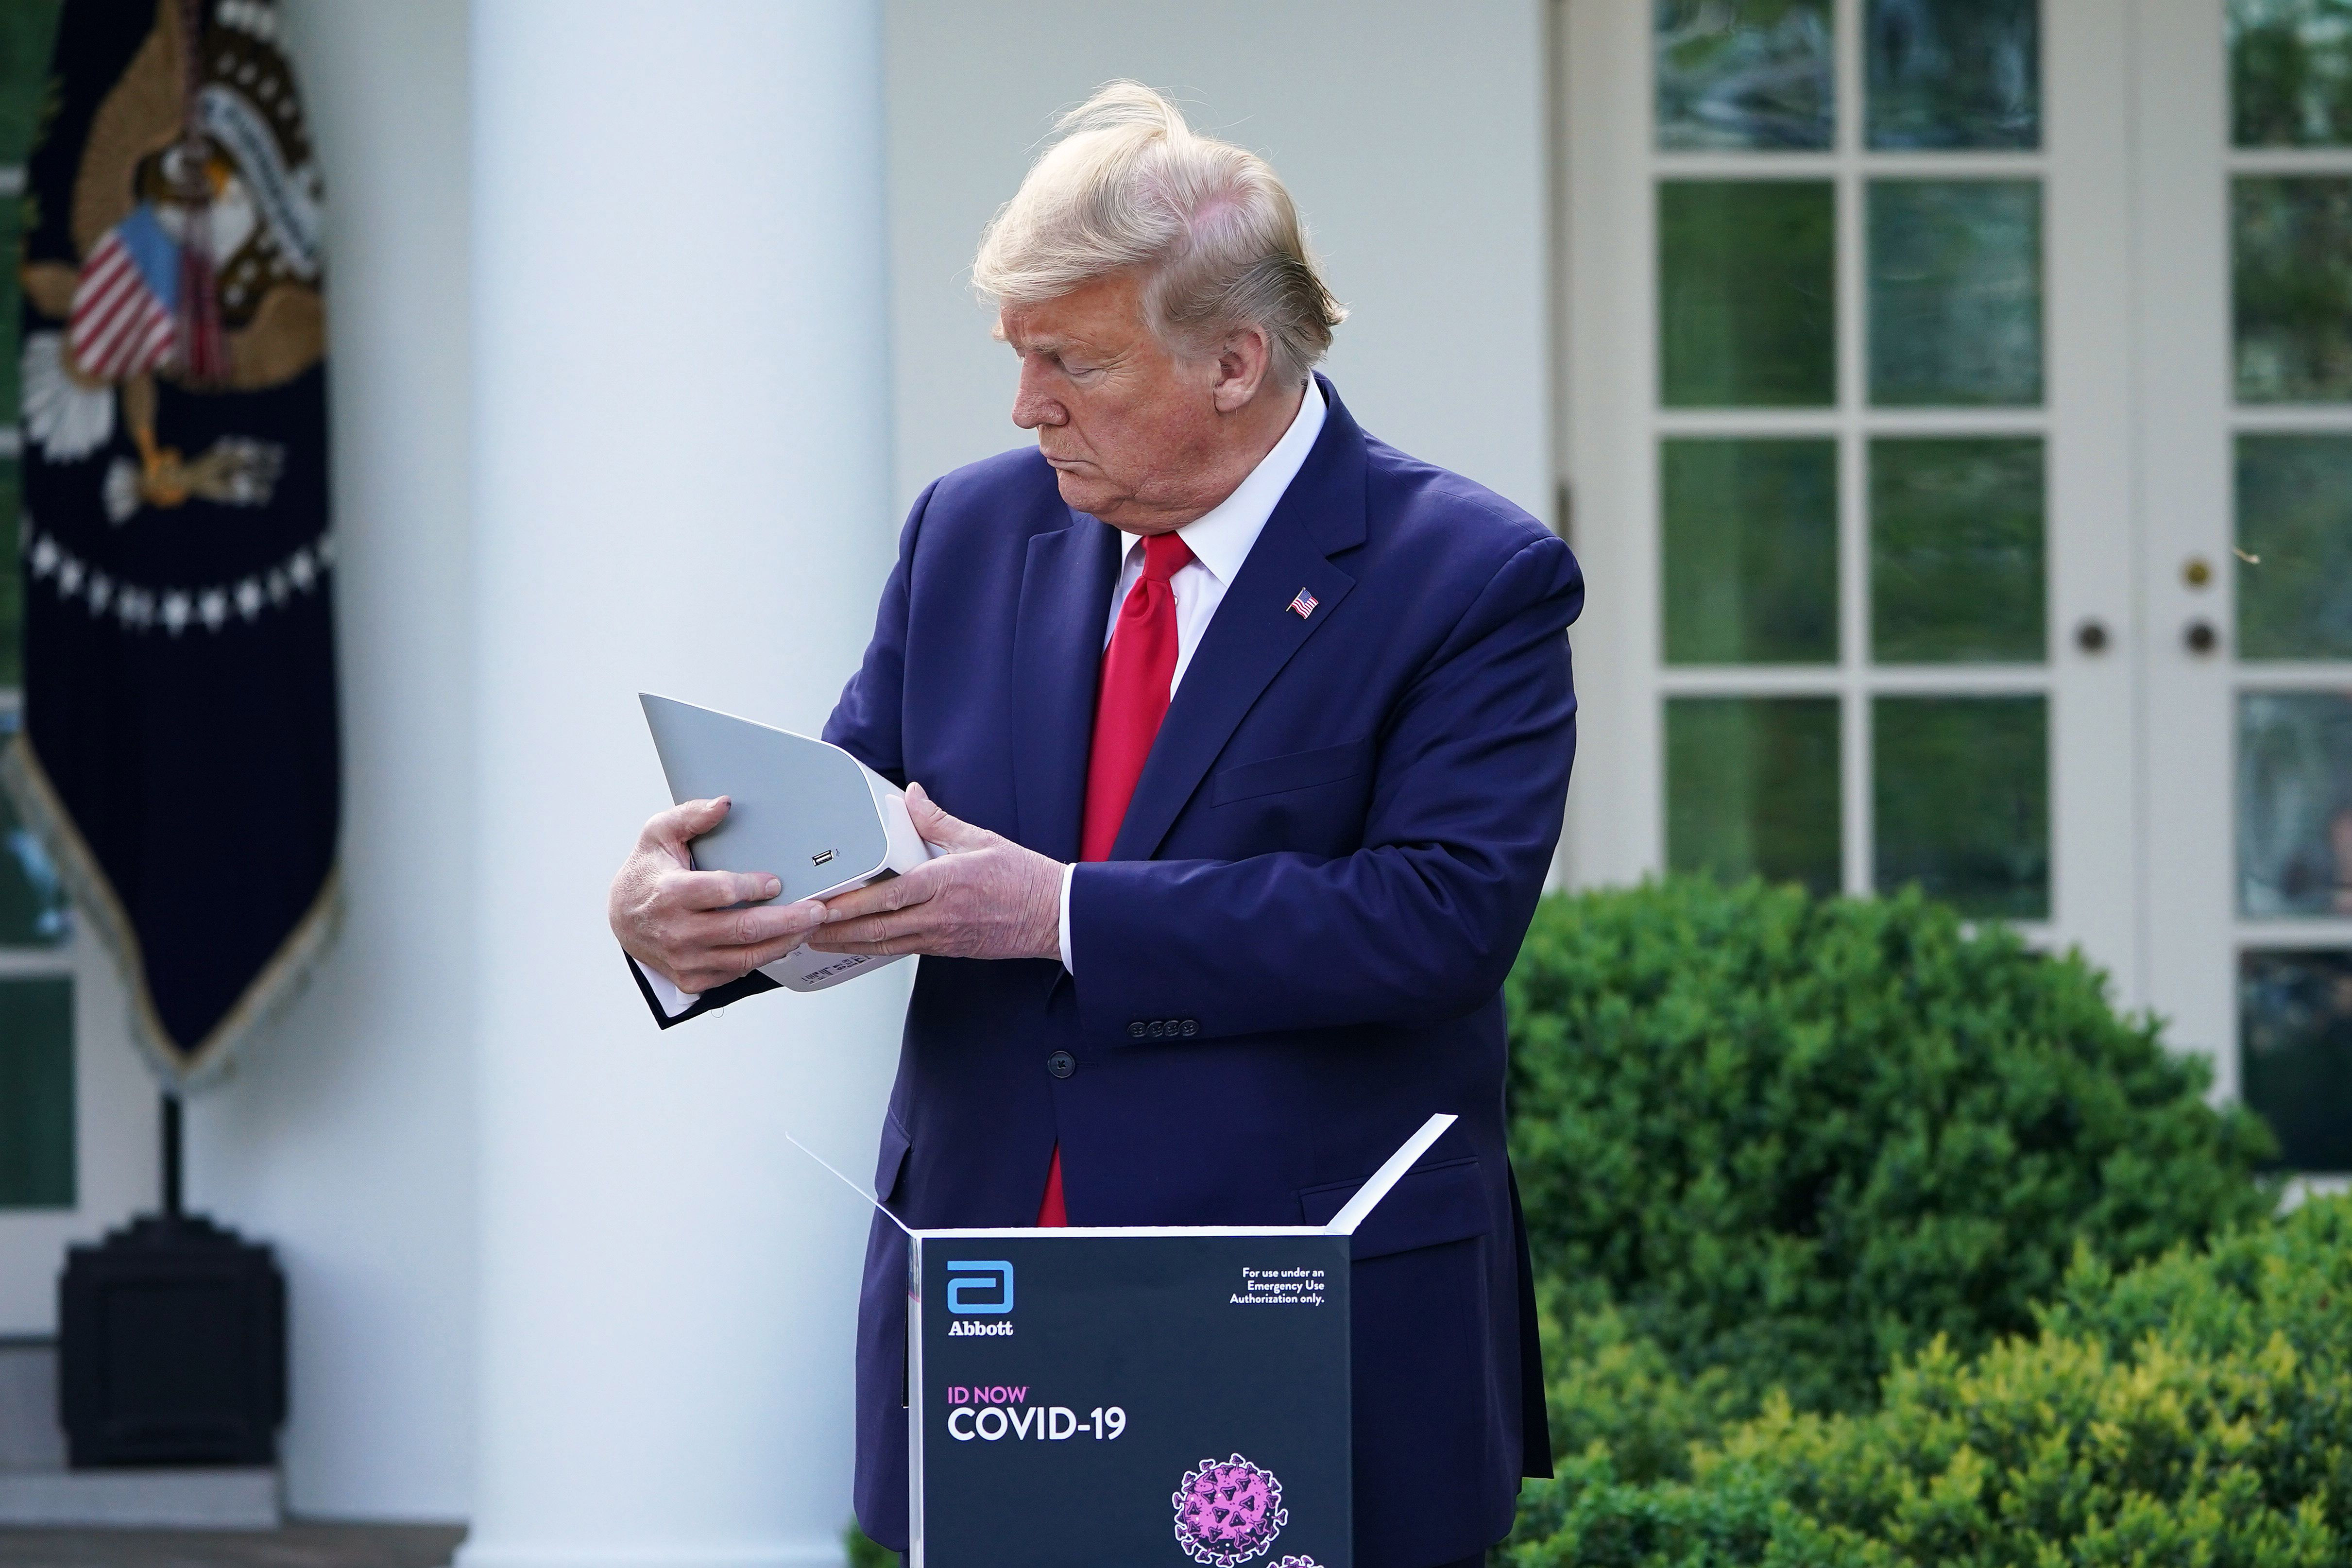 President Donald Trump holds a 5-minute test for Covid-19 from Abbott Laboratories during a briefing on the novel coronavirus at the White House on March 30.